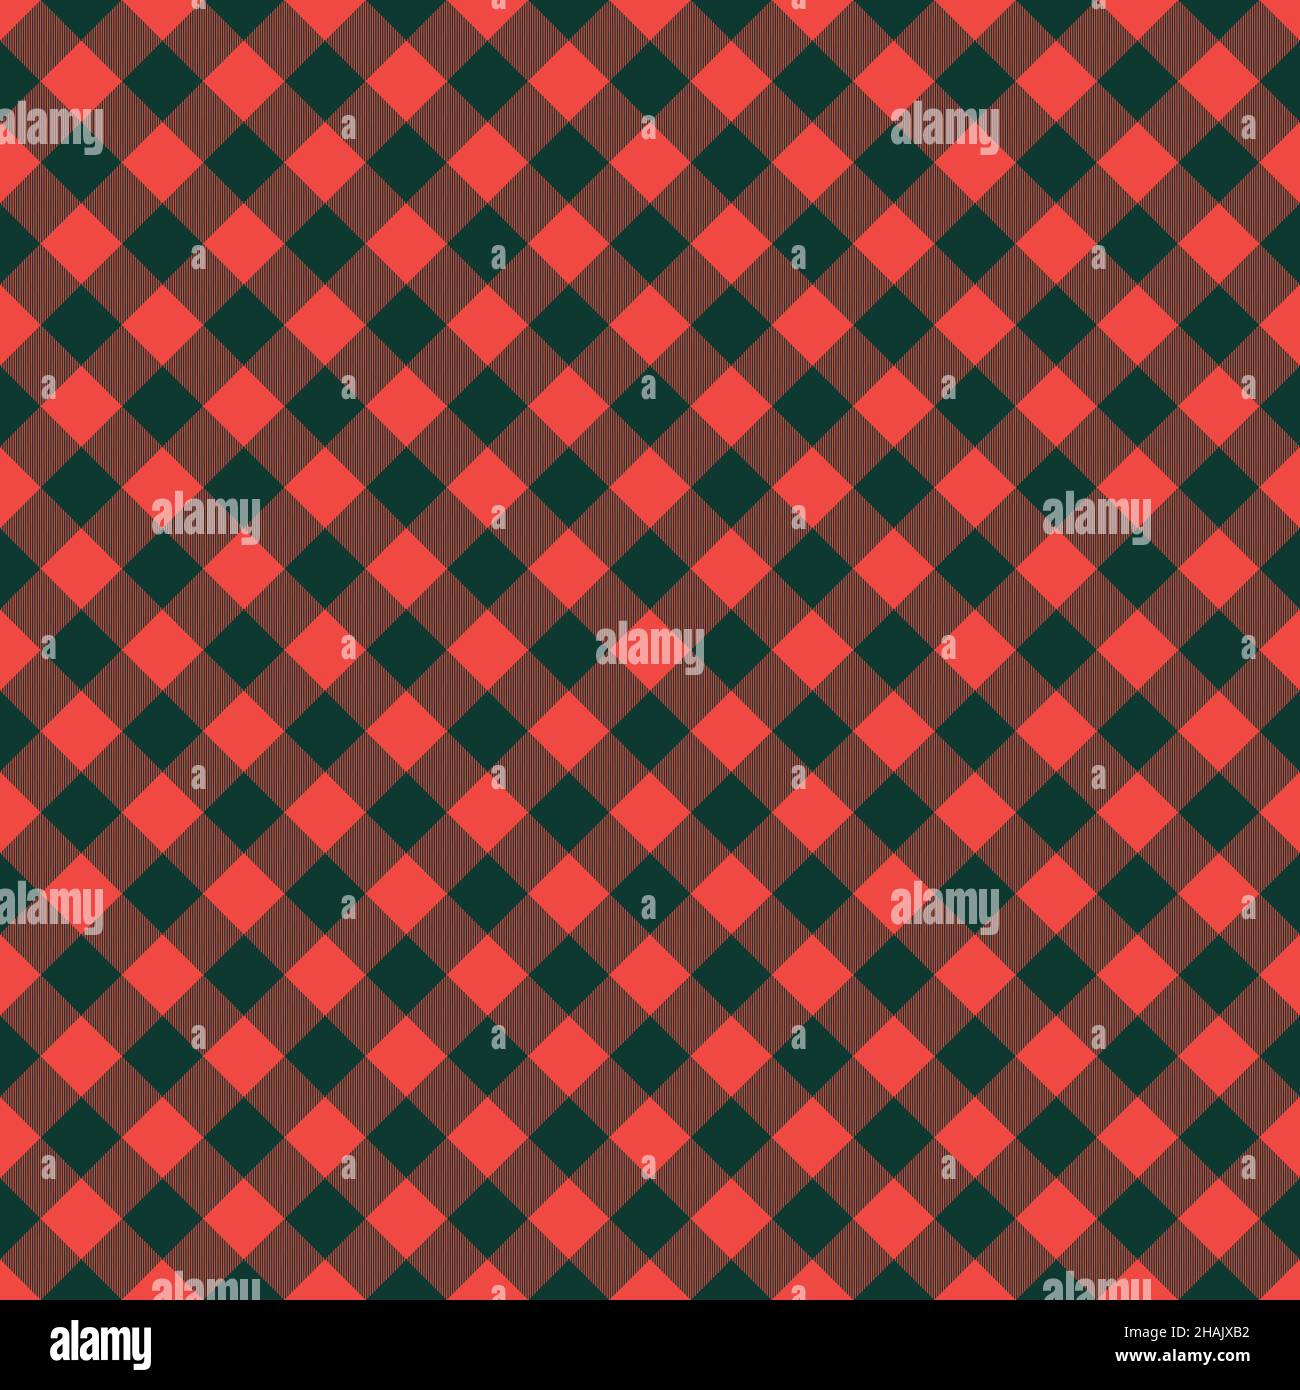 Seamless pattern with traditional vichy graphic for textile. Stock Vector